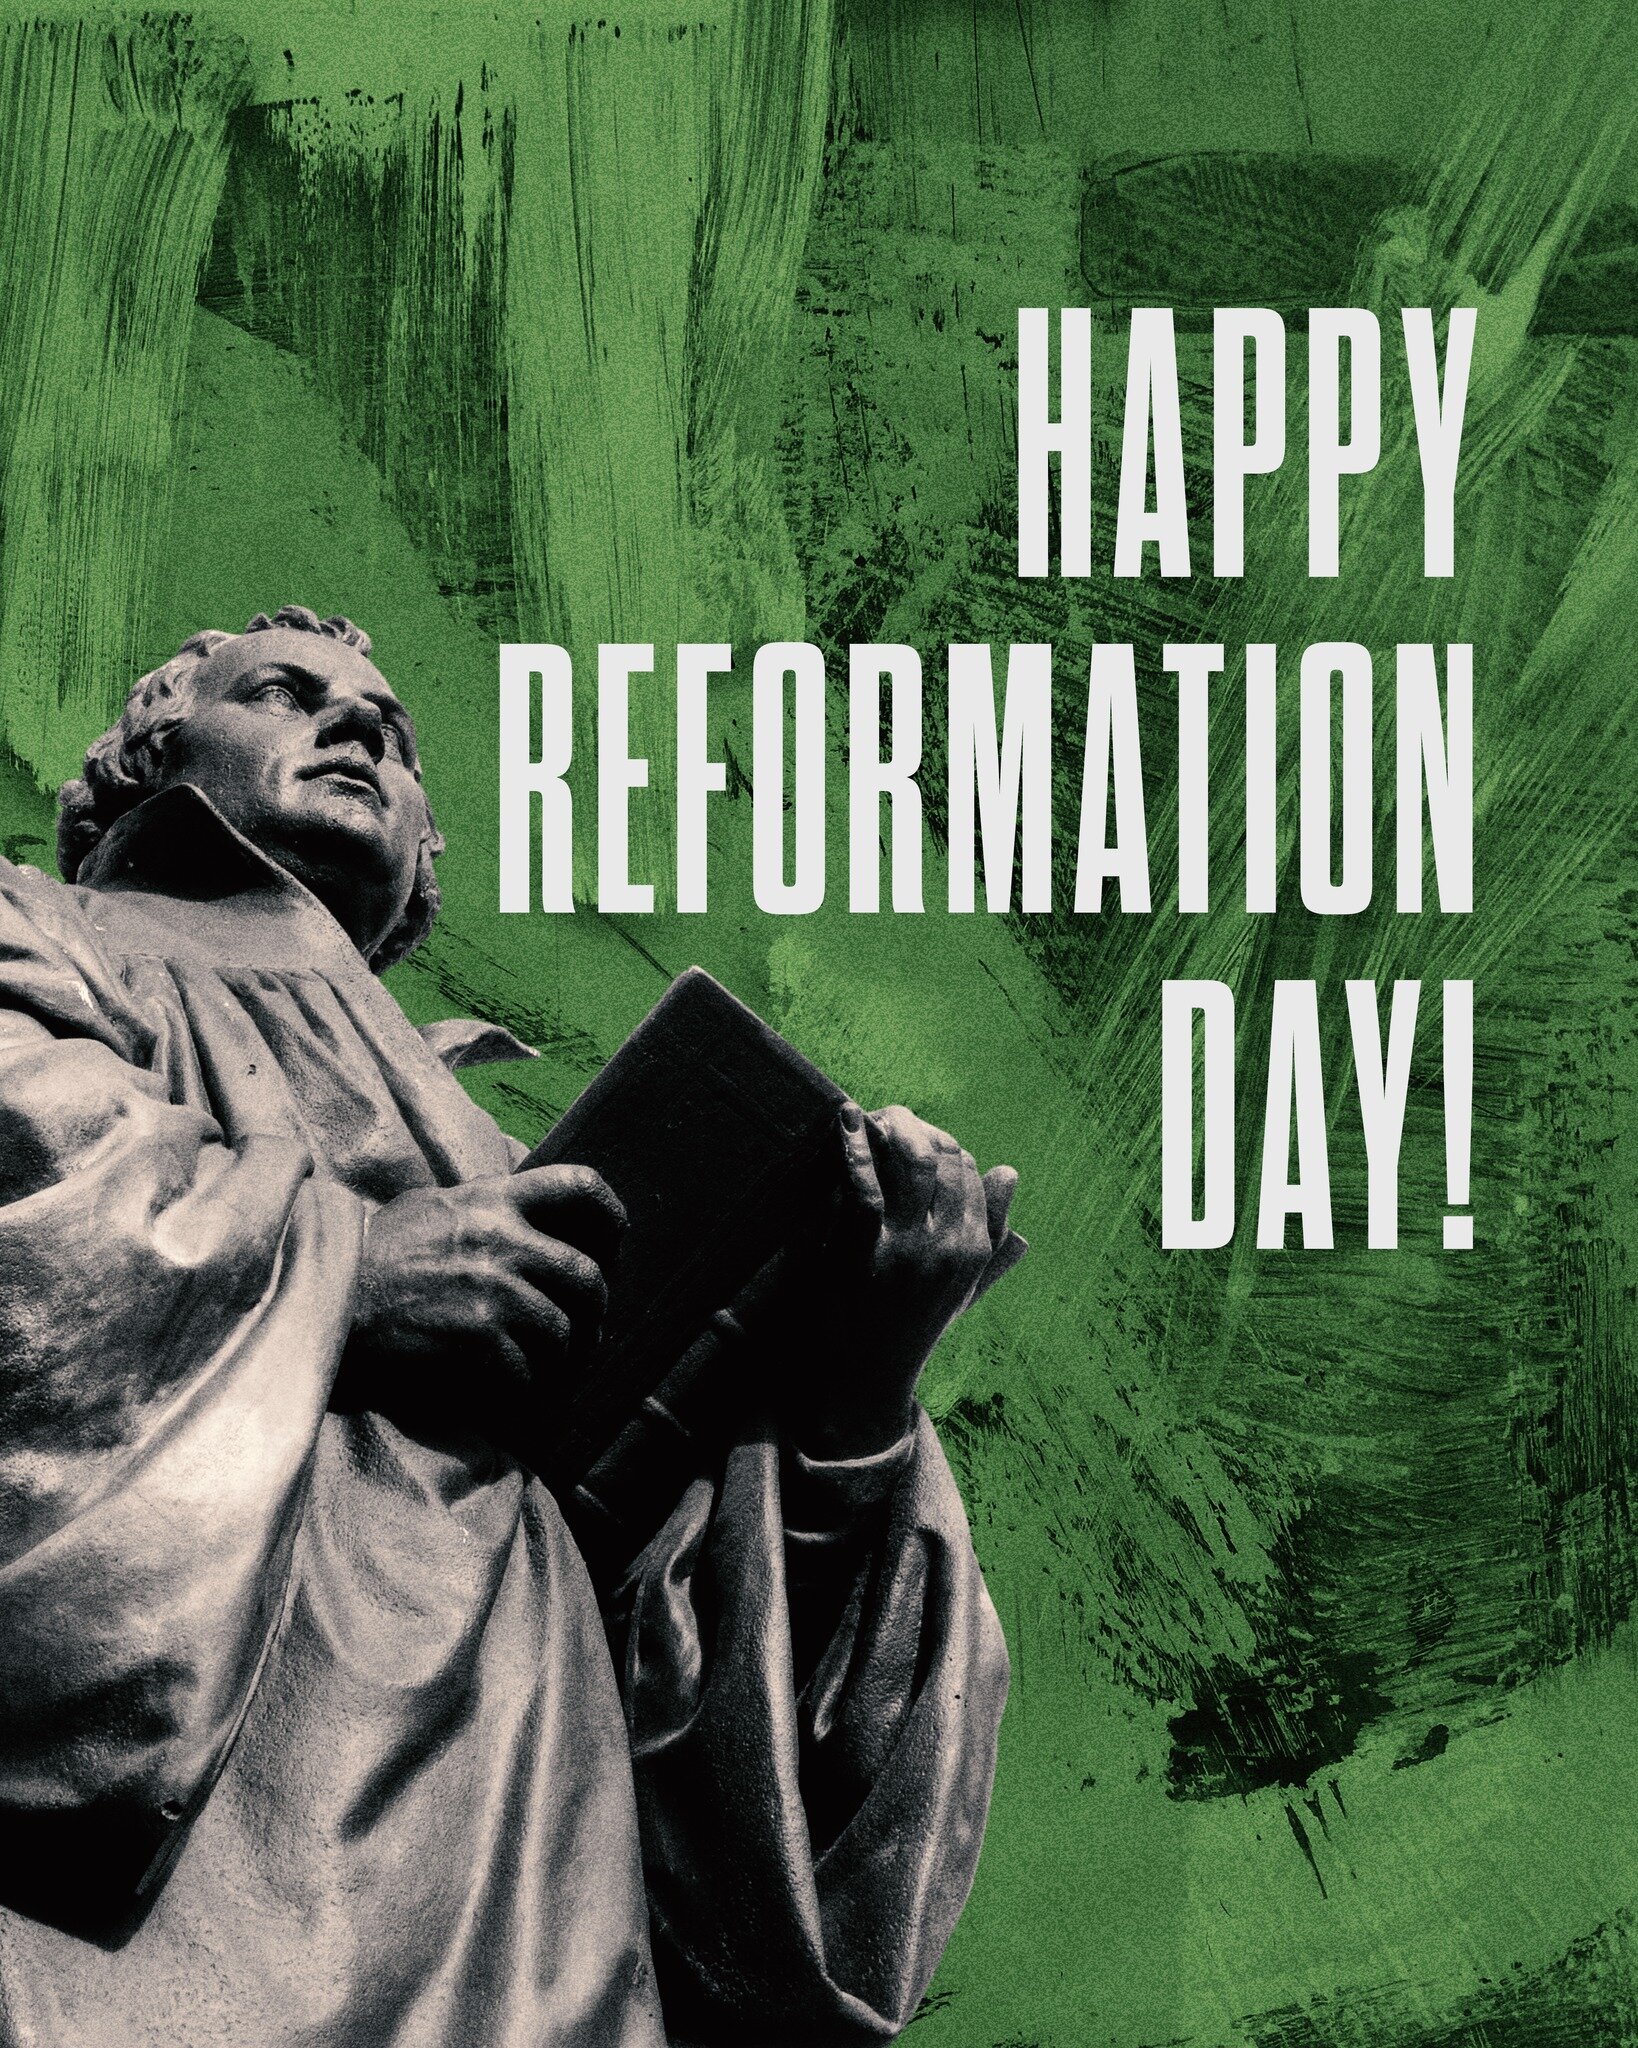 Church history owes a great debt to Martin Luther and other reformers who took a bold stand and stood on the truth of the Scriptures.

&quot;We do not become righteous by doing righteous deeds but, having been made righteous, we do righteous deeds.&q